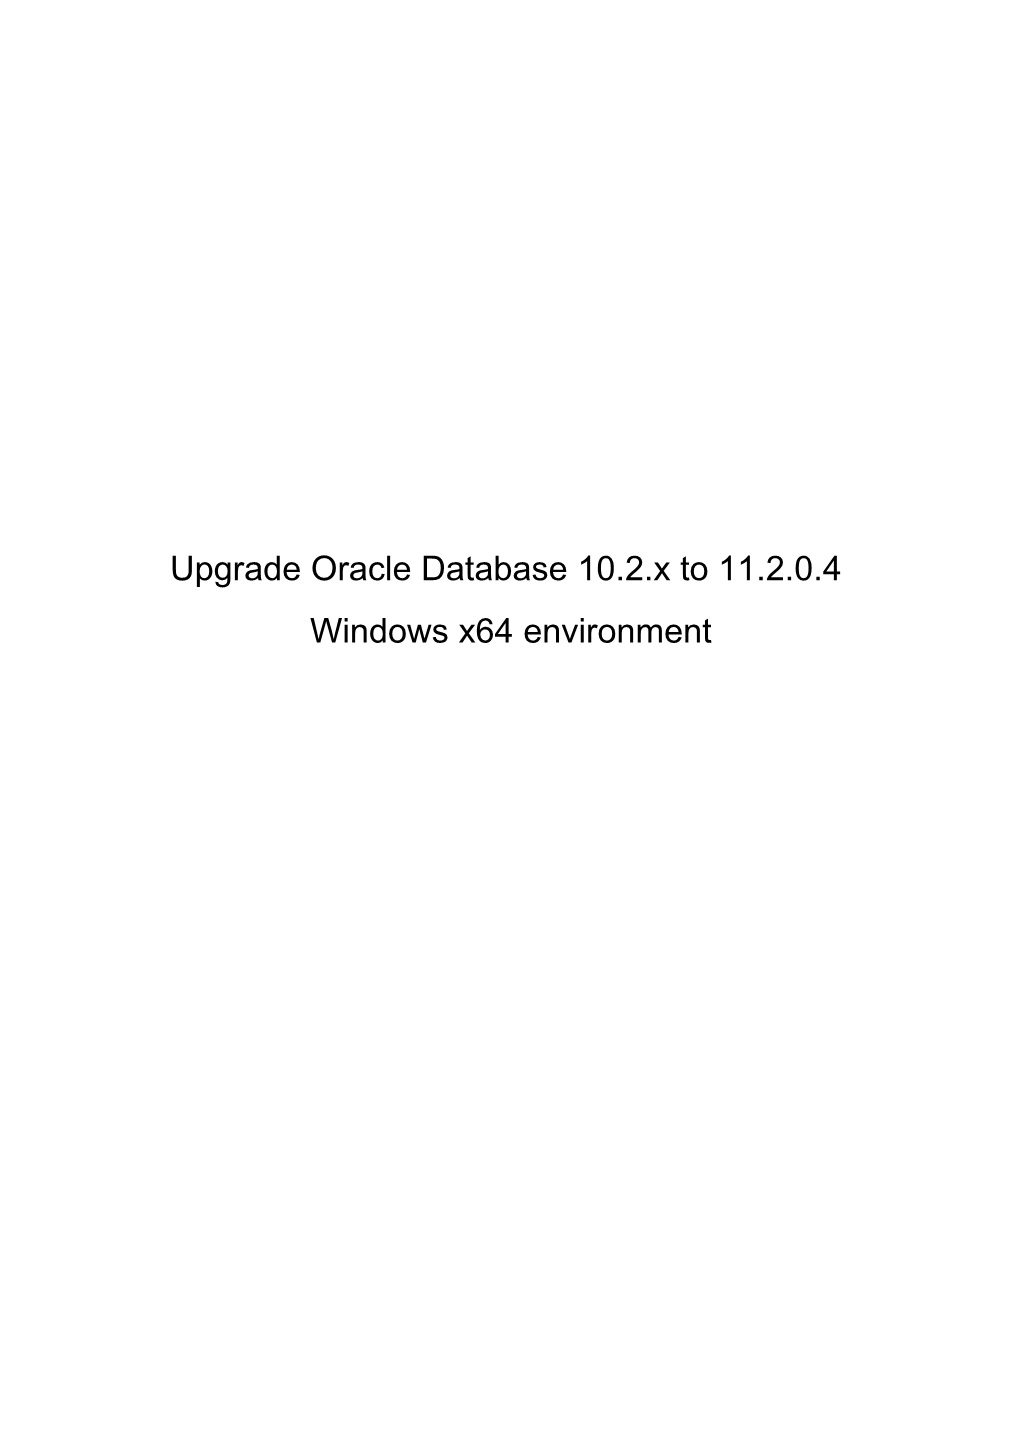 Upgrade Oracle 10 to 11.2.Pdf